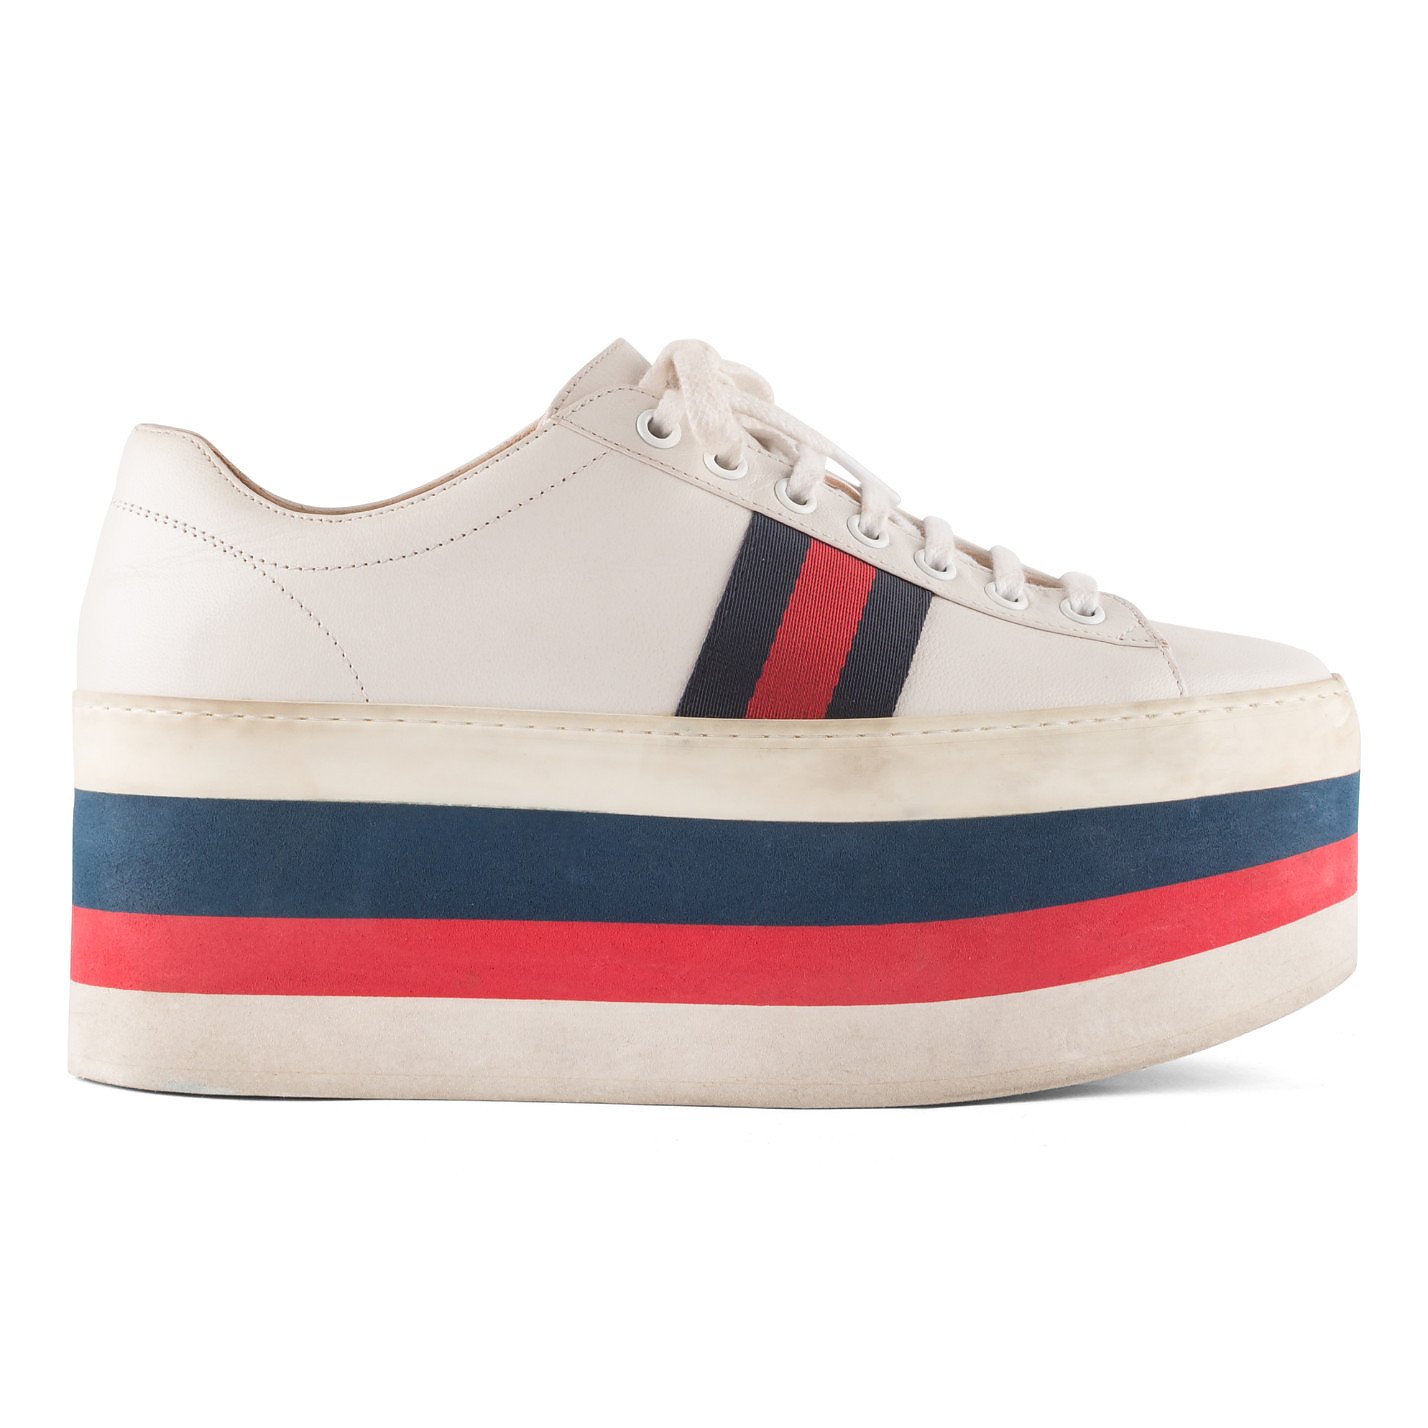 1986 gucci sneakers